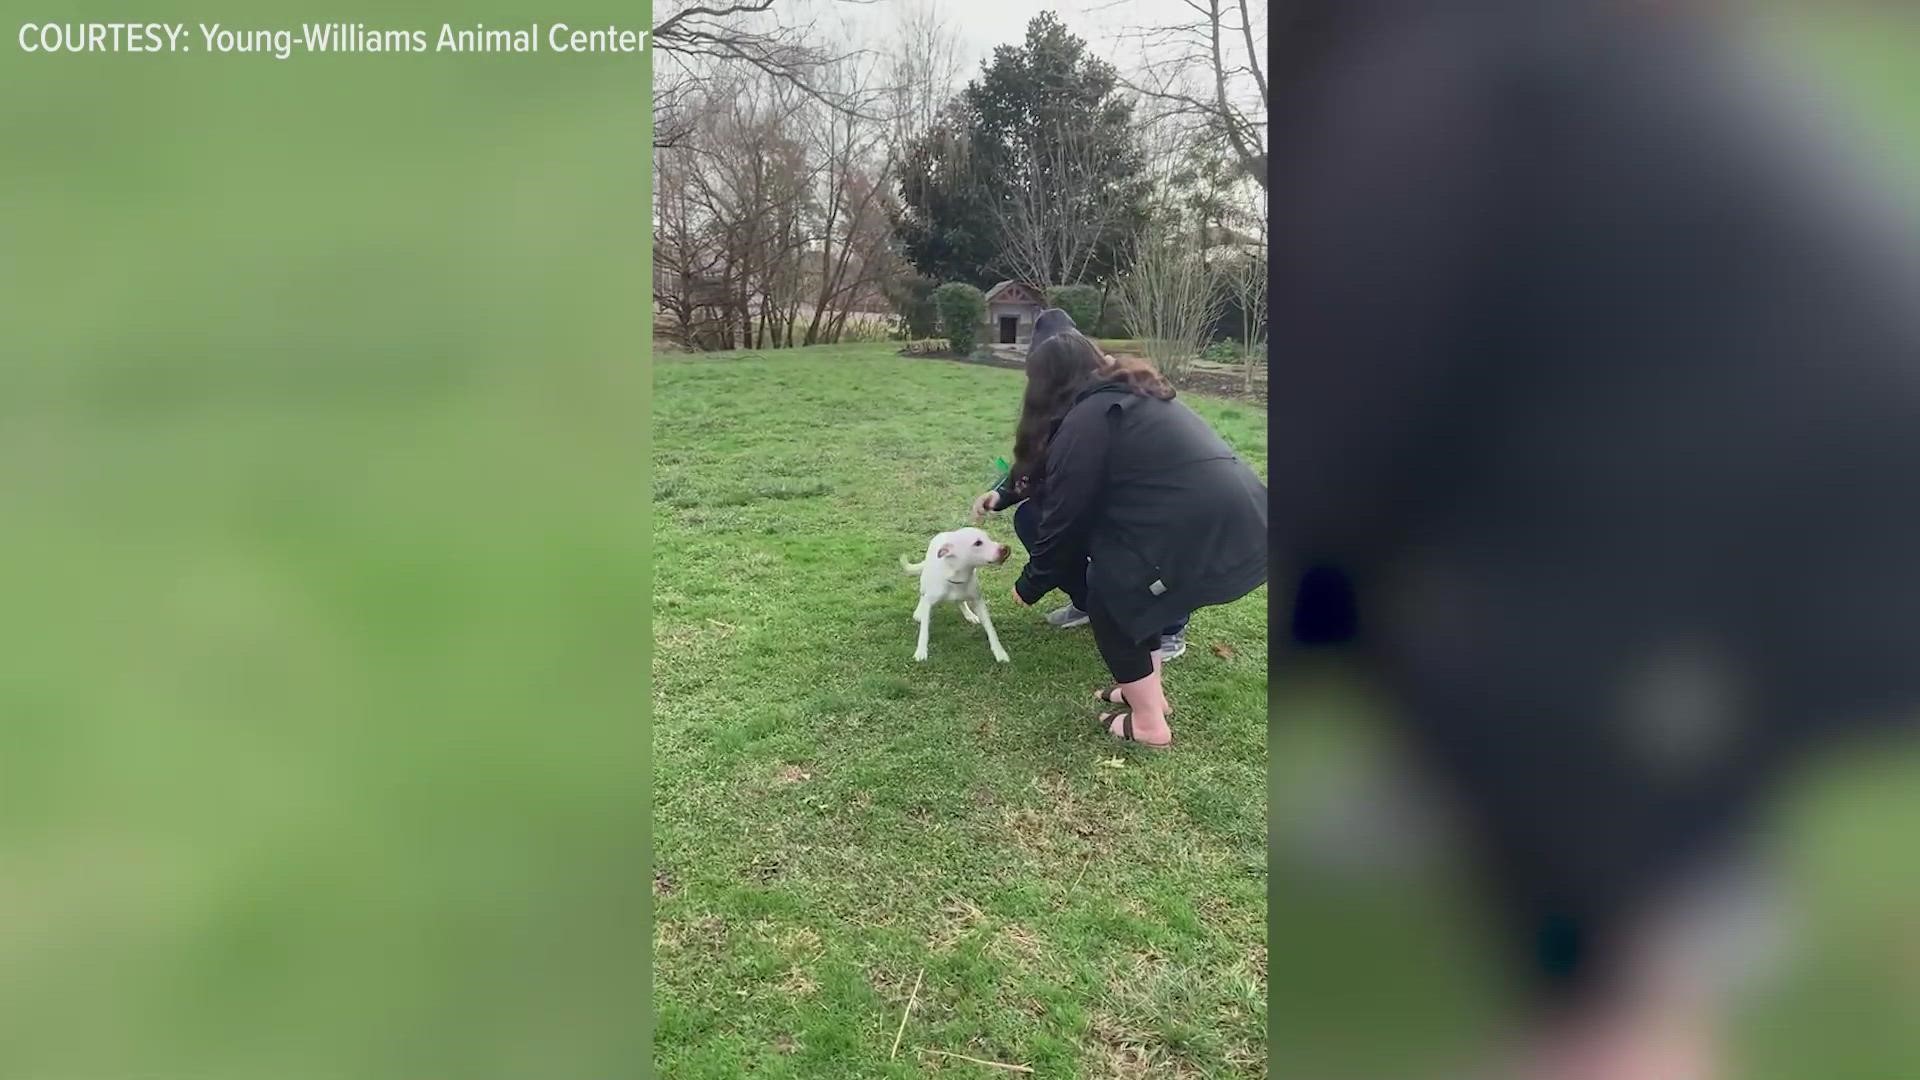 Angel the dog was missing for nearly a year when her owners saw a post with a very familiar pup on Young-Williams Animal Center's Facebook page.